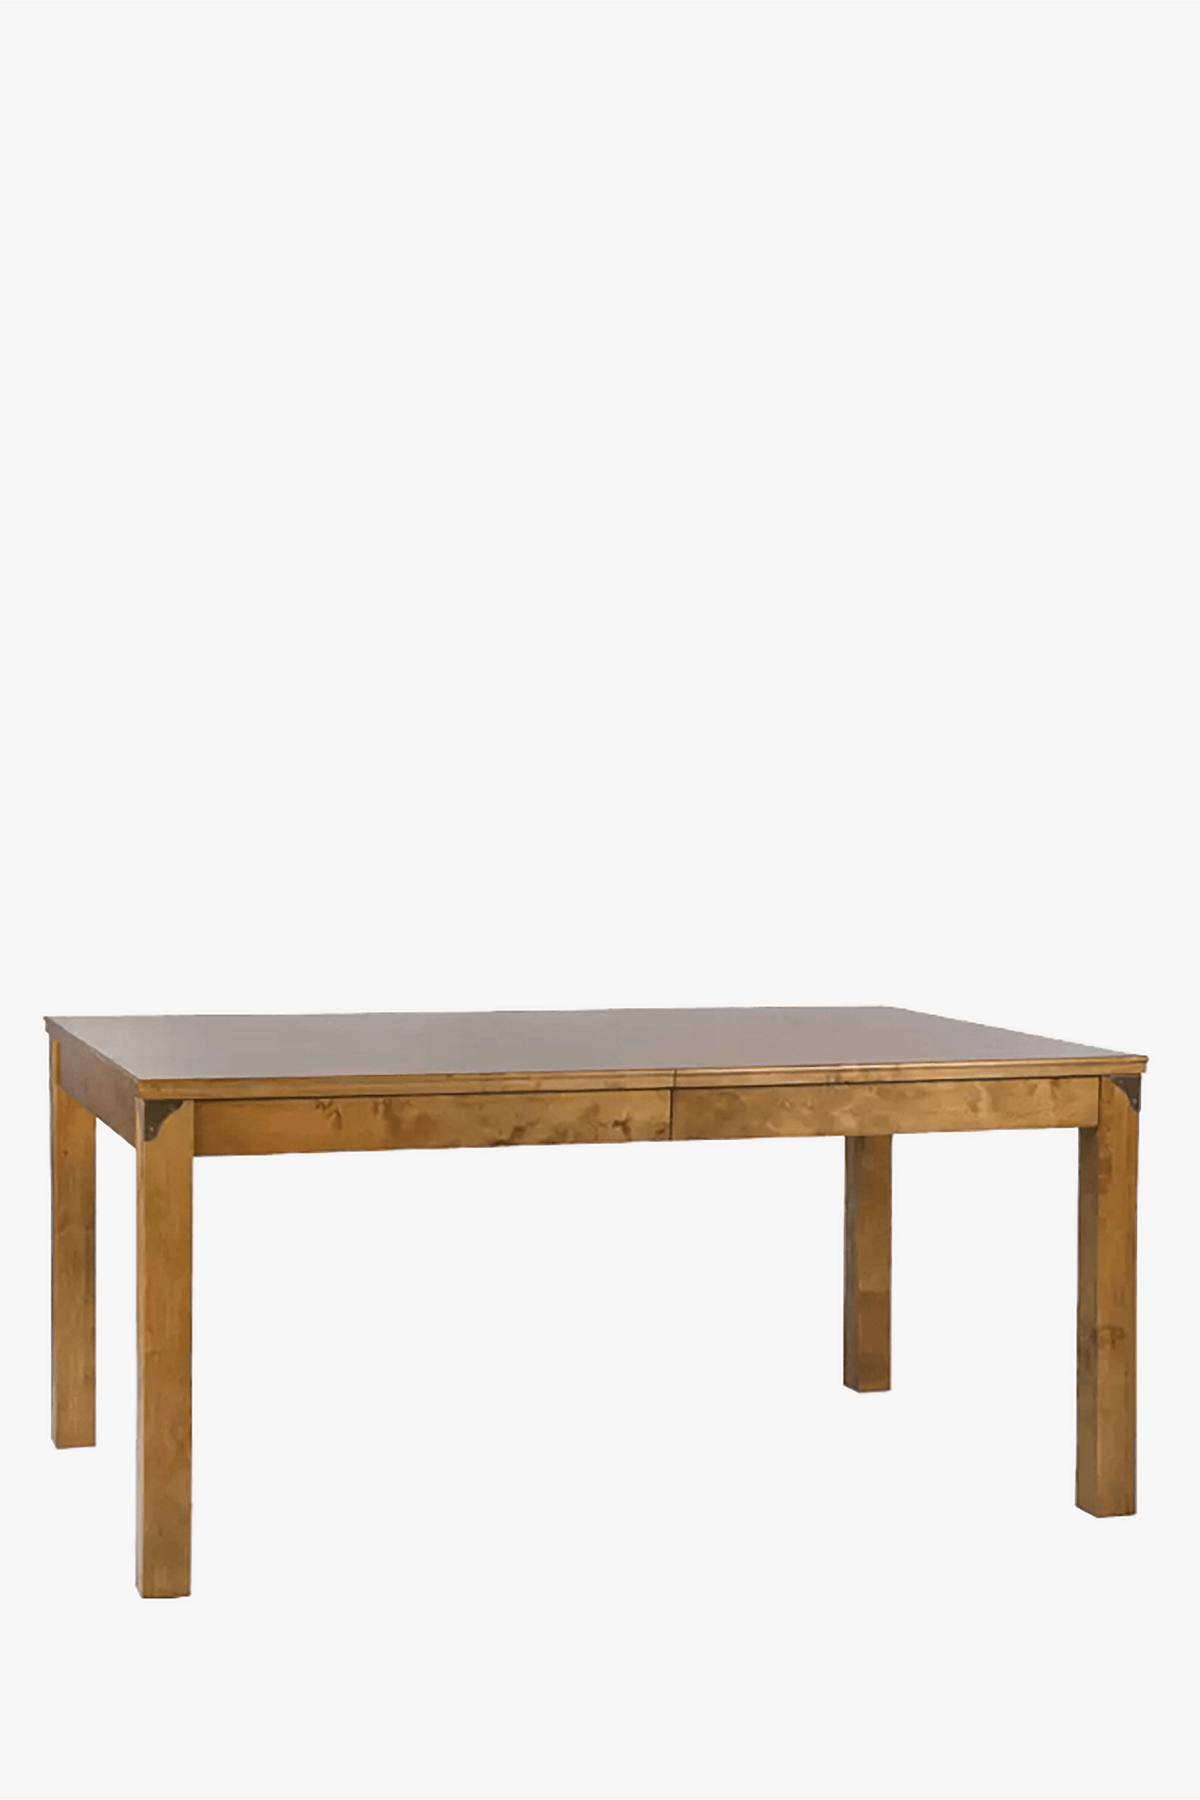 Balmoral Extending Dining Table